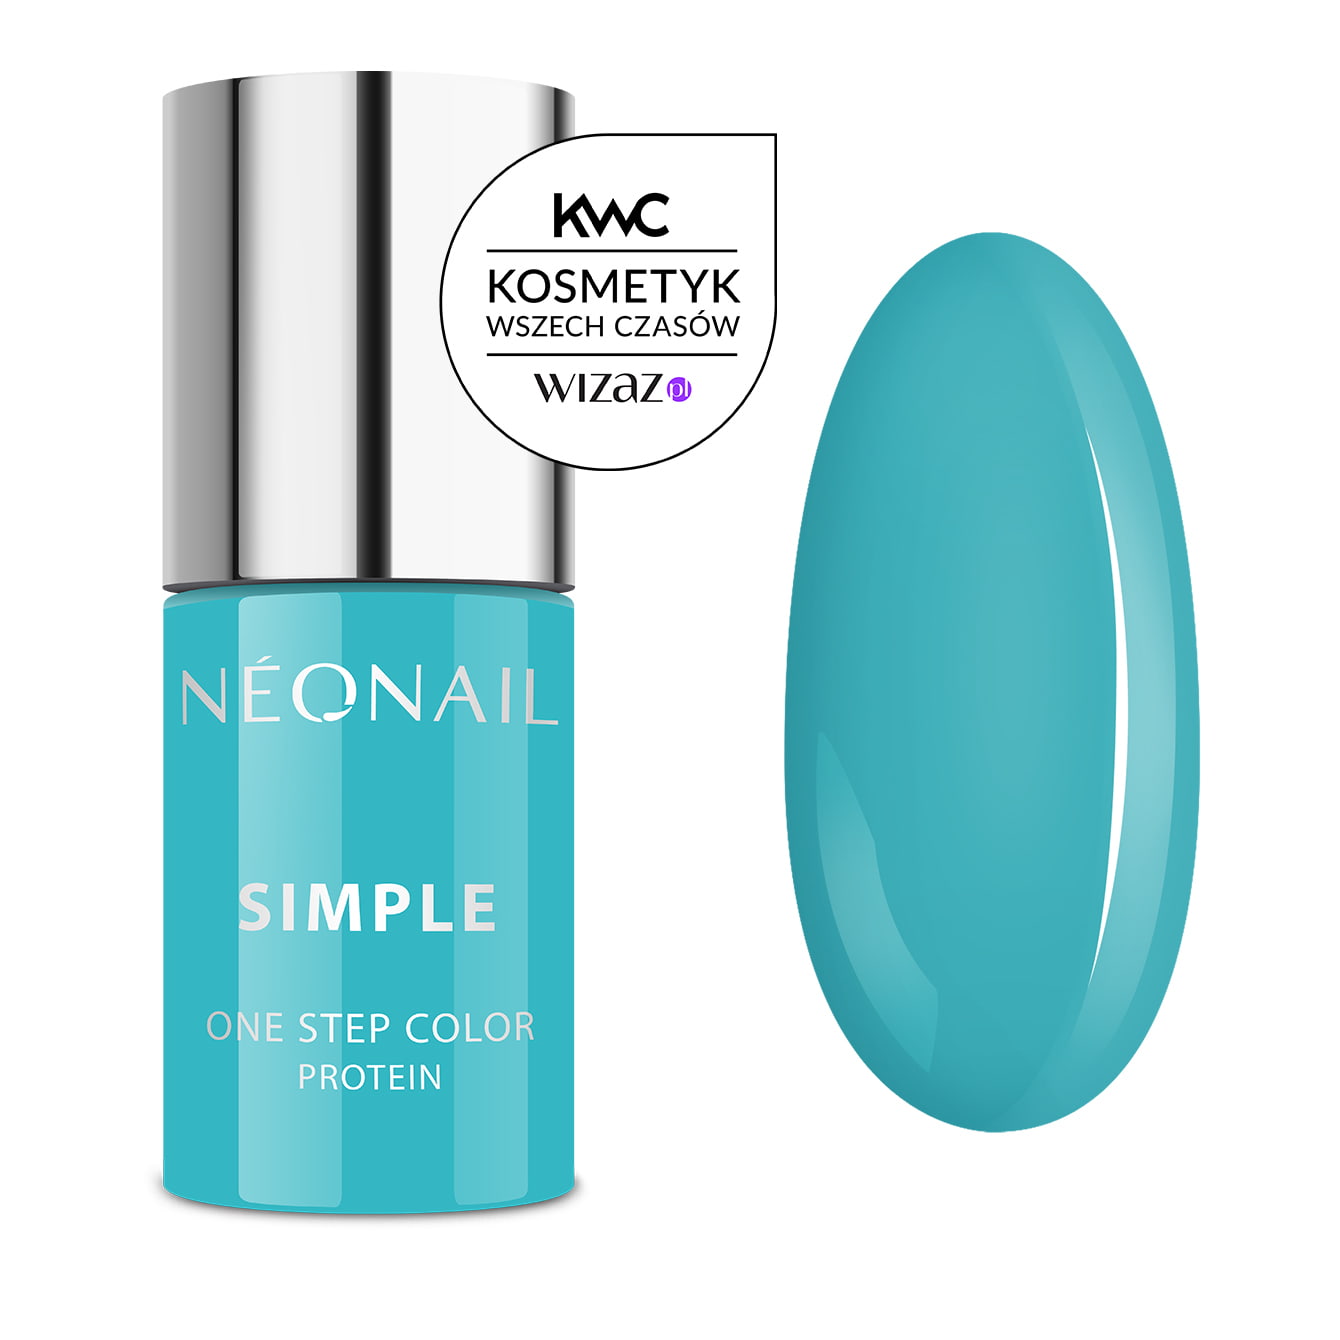 NeoNail Simple One Step Color Protein 7,2ml - Lucky